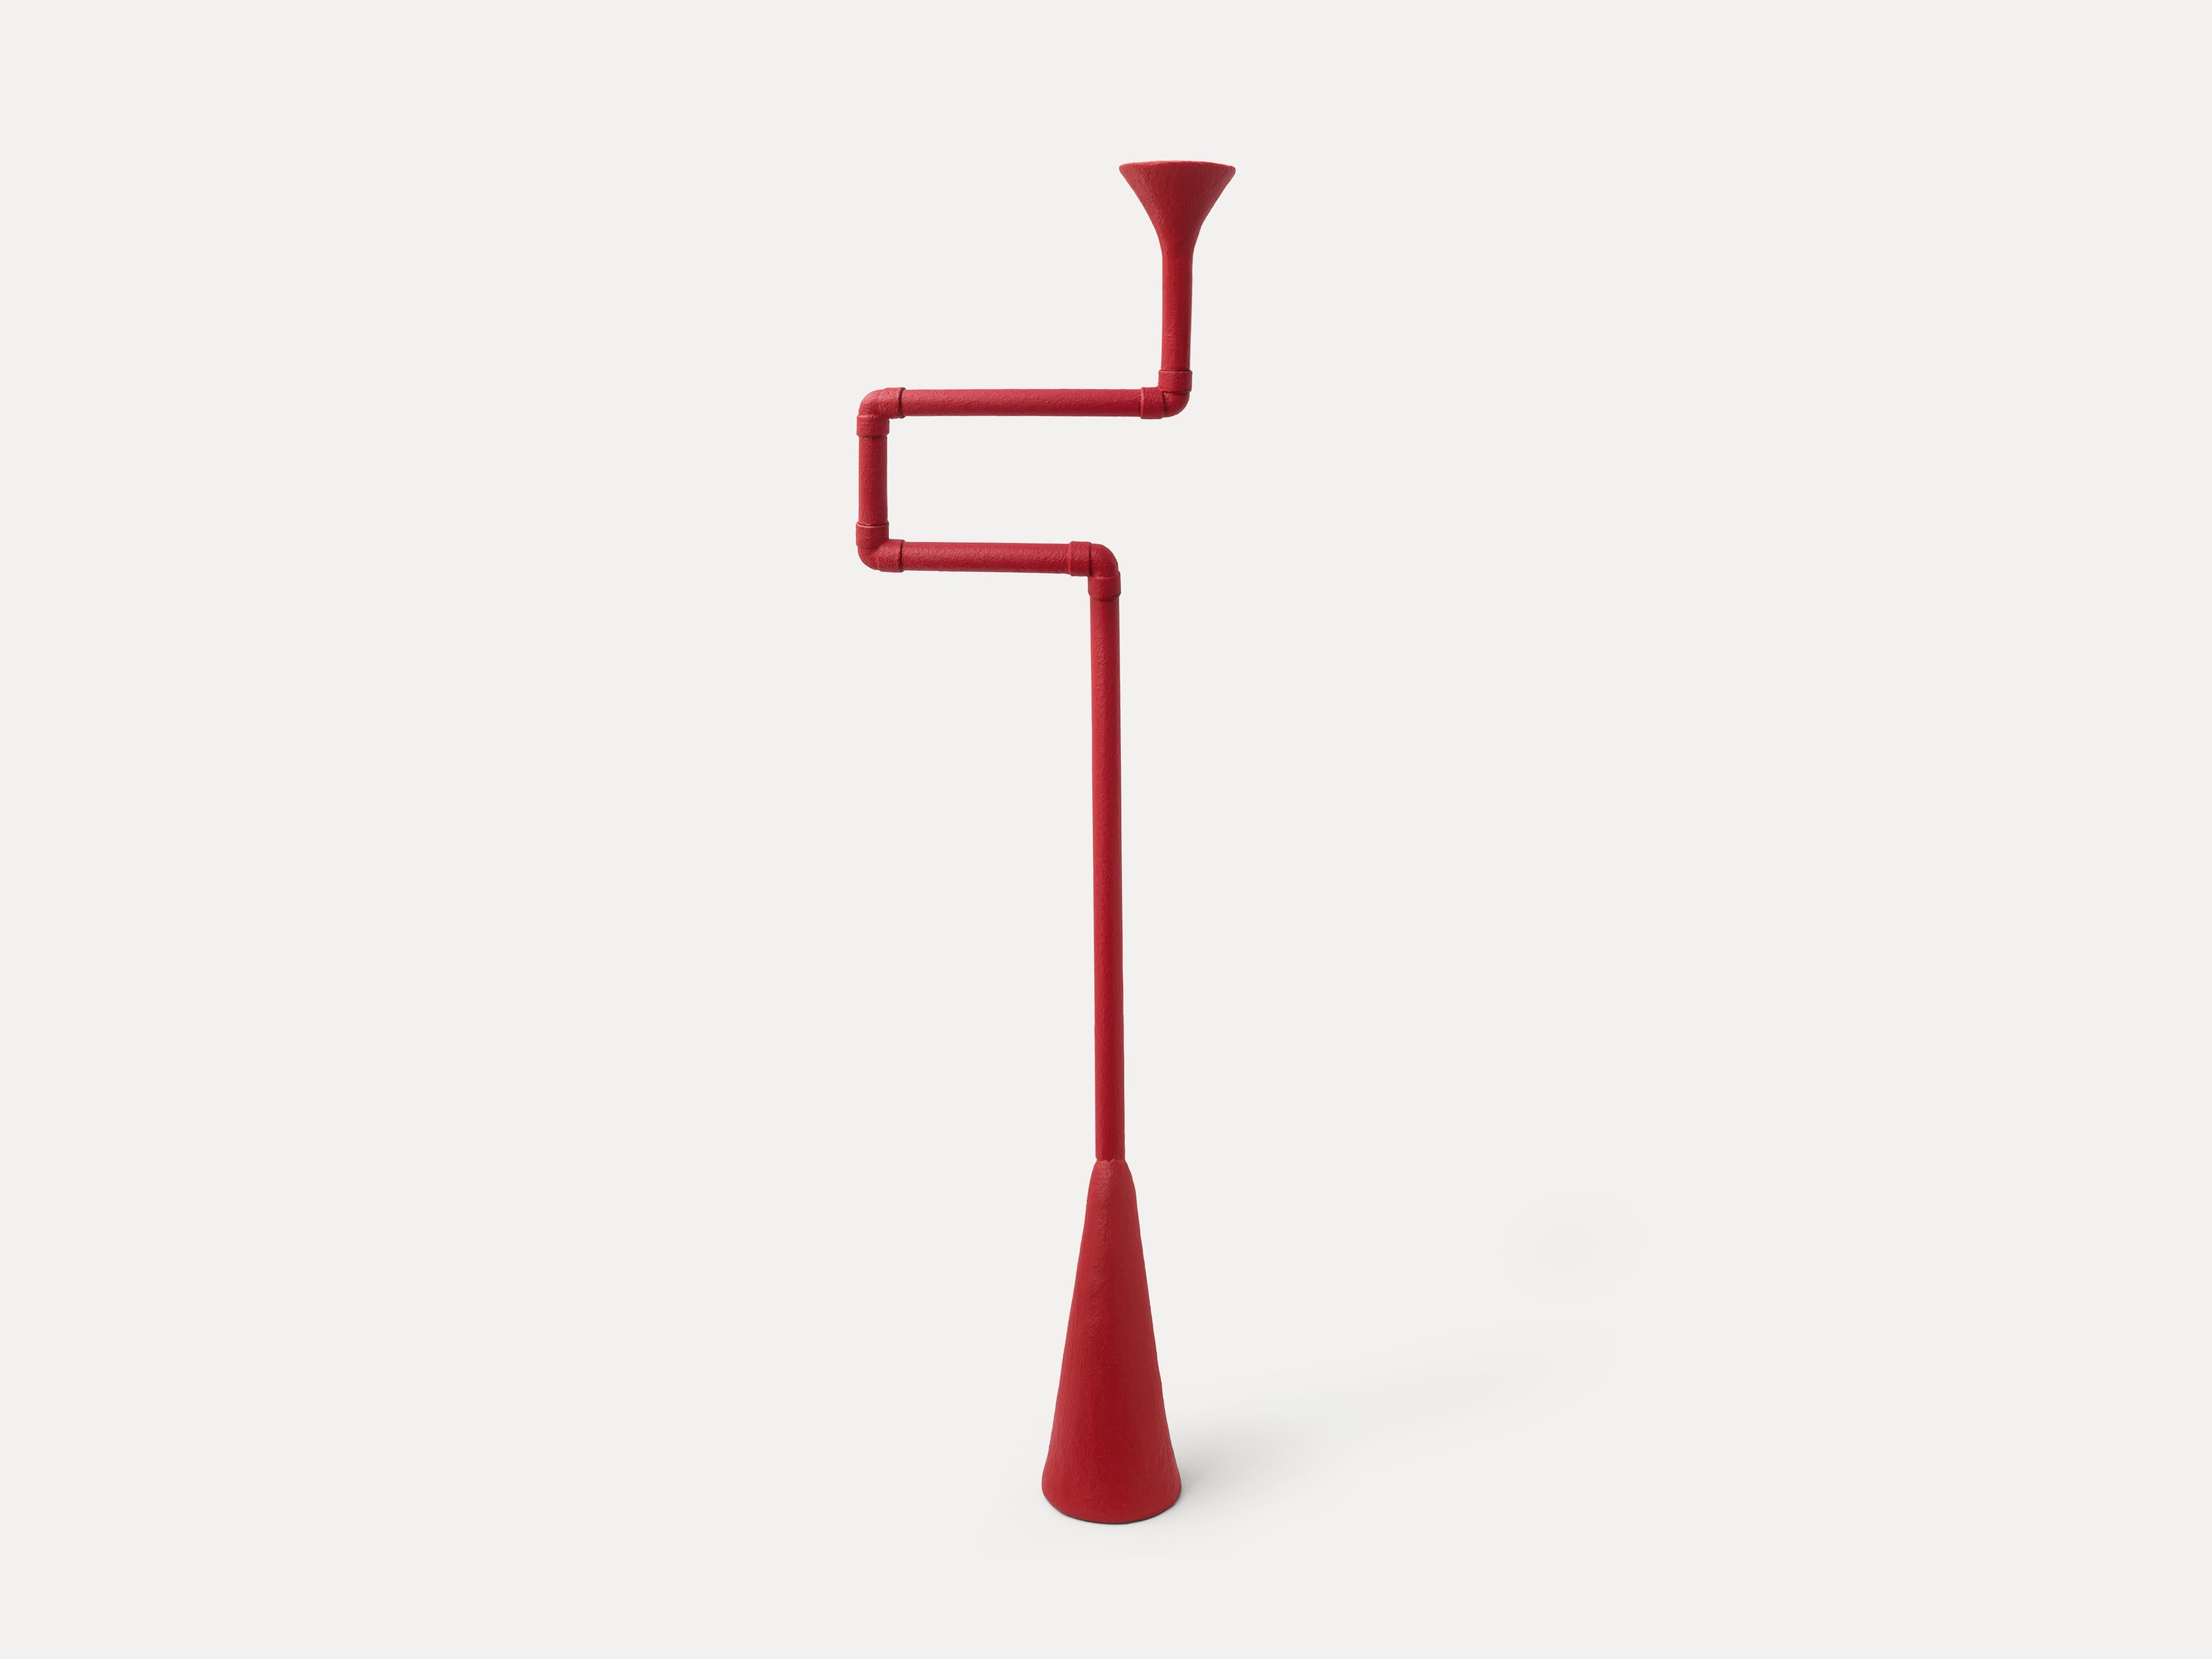 Flamingo Dimmable Floor lamp.
Reclaimed plastic, PVA, sand, acrylic paint, spray paint, pigment, polyurethane, LED dimmable spot bulb.
The body of the Flamingo Lamp is adjustable in 3 locations.